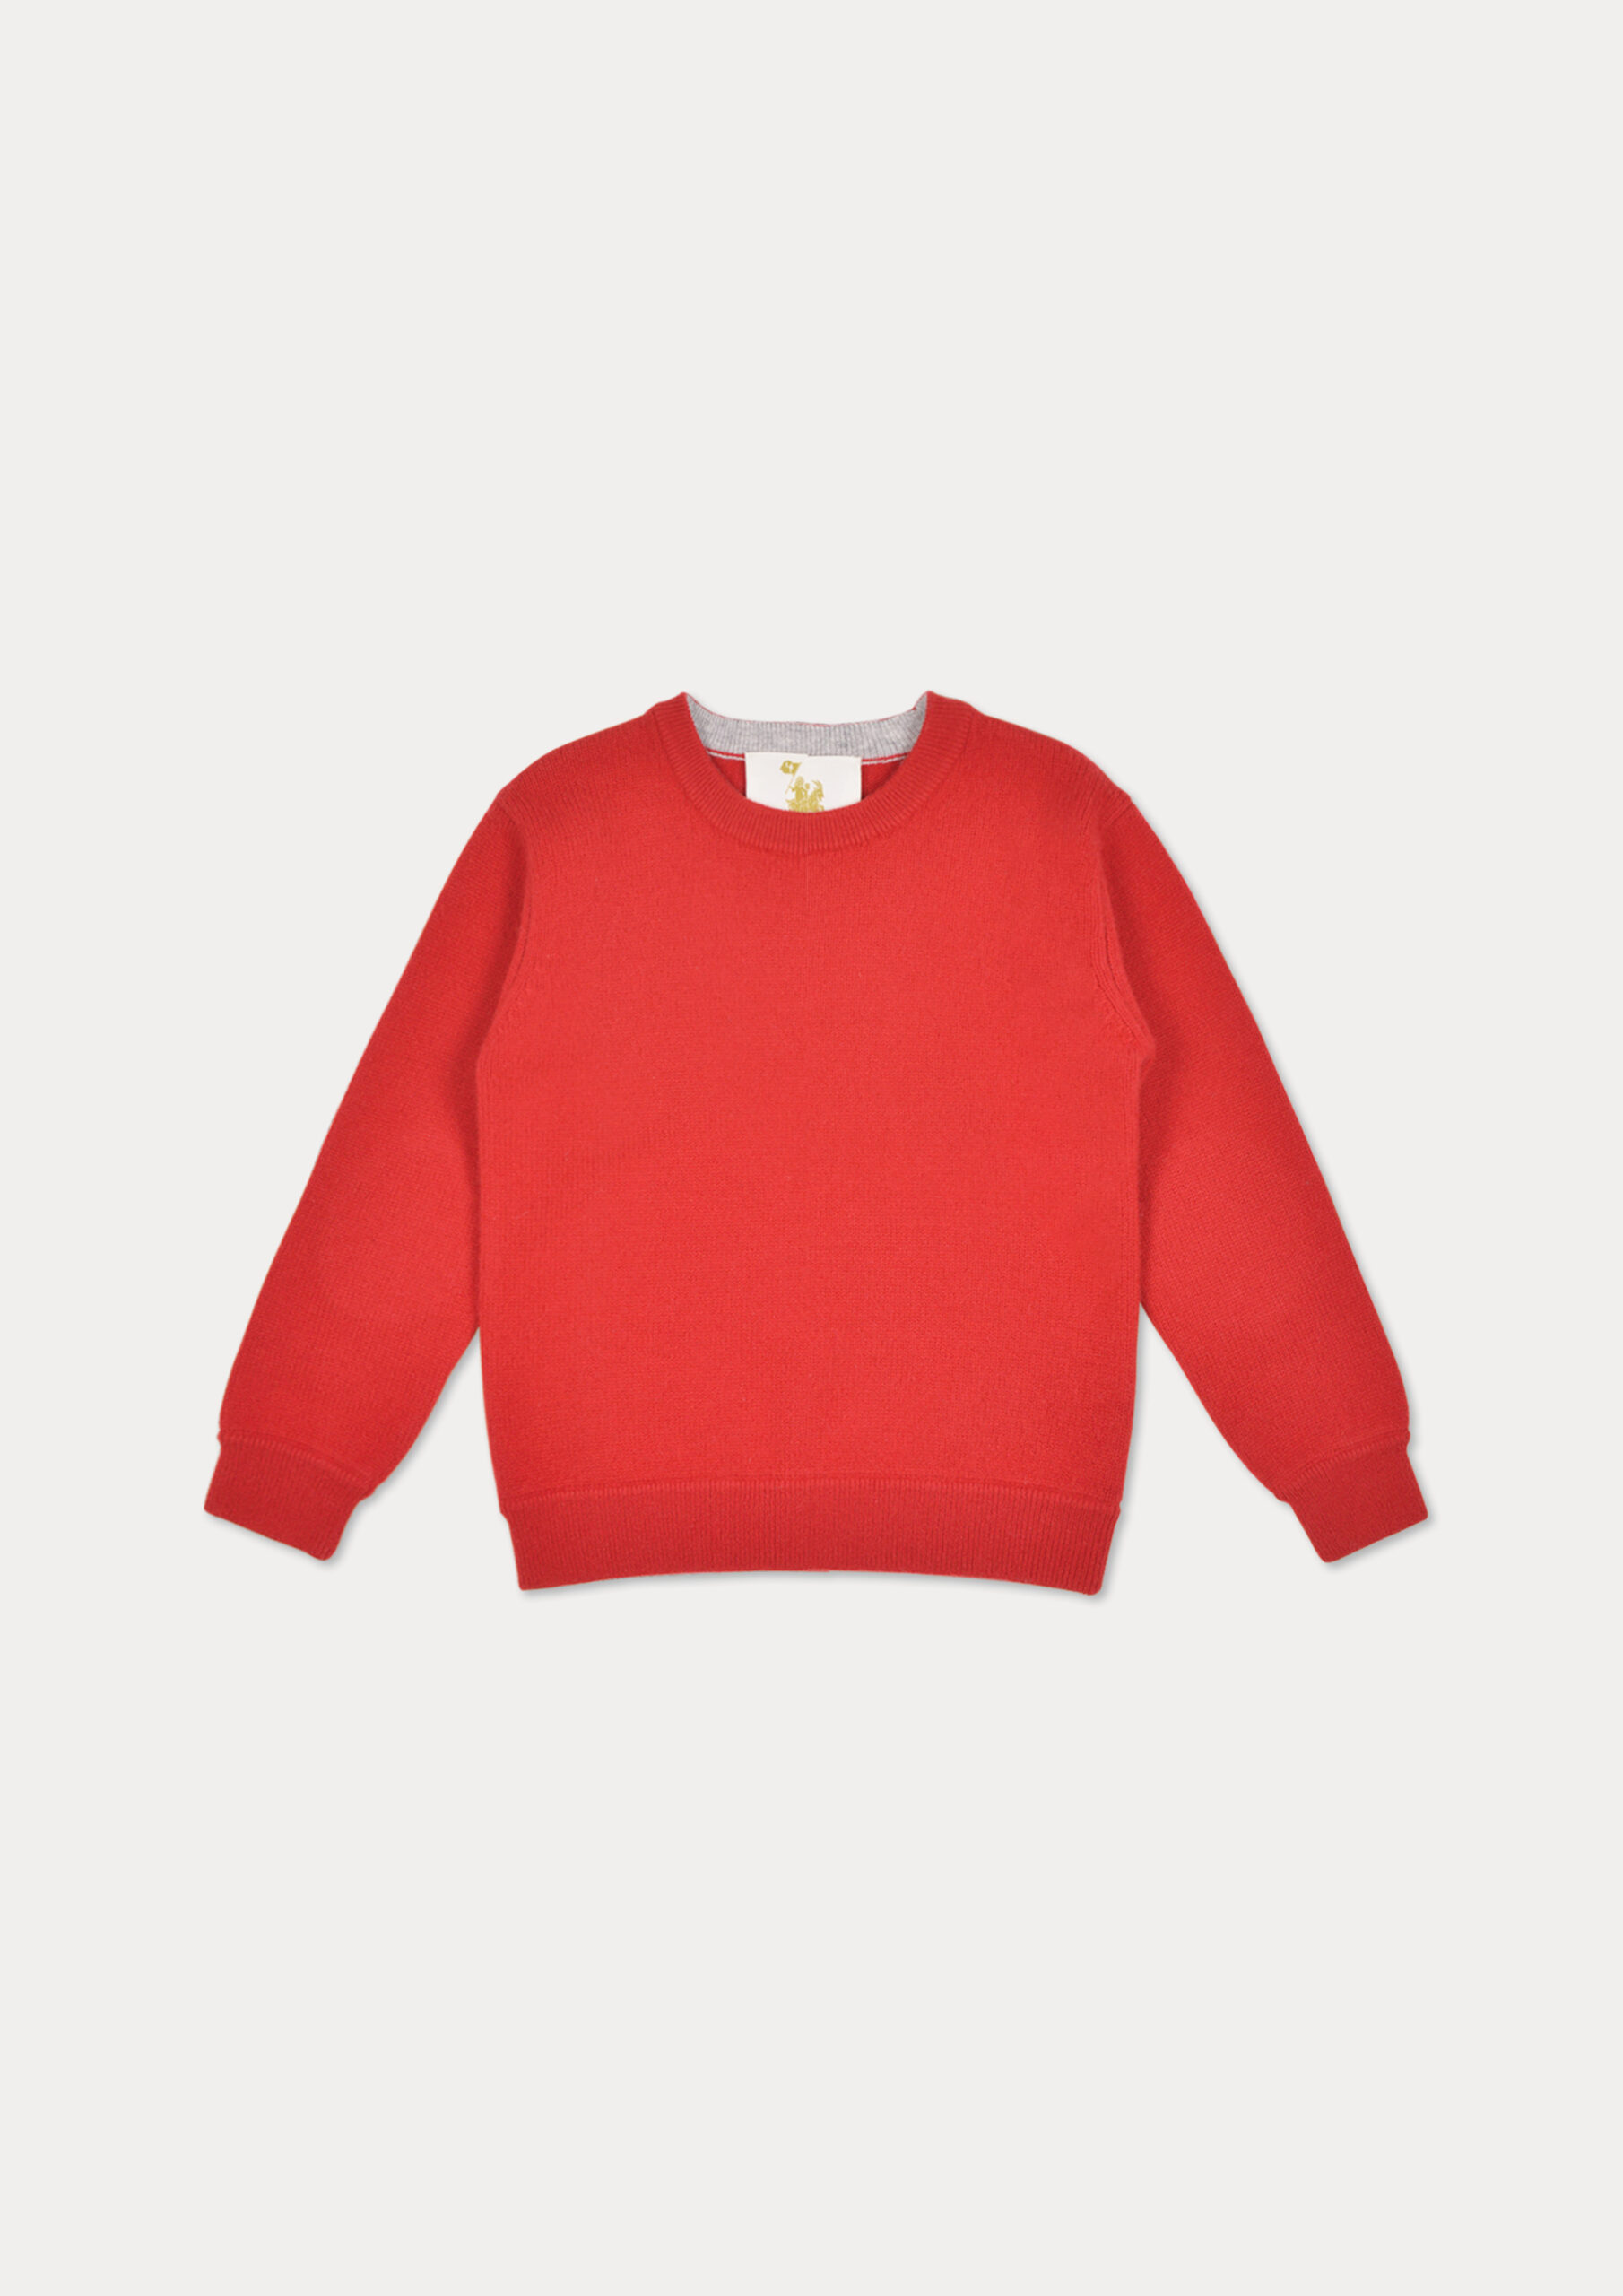 Grey Patch Red Cashmere Sweater – M&7